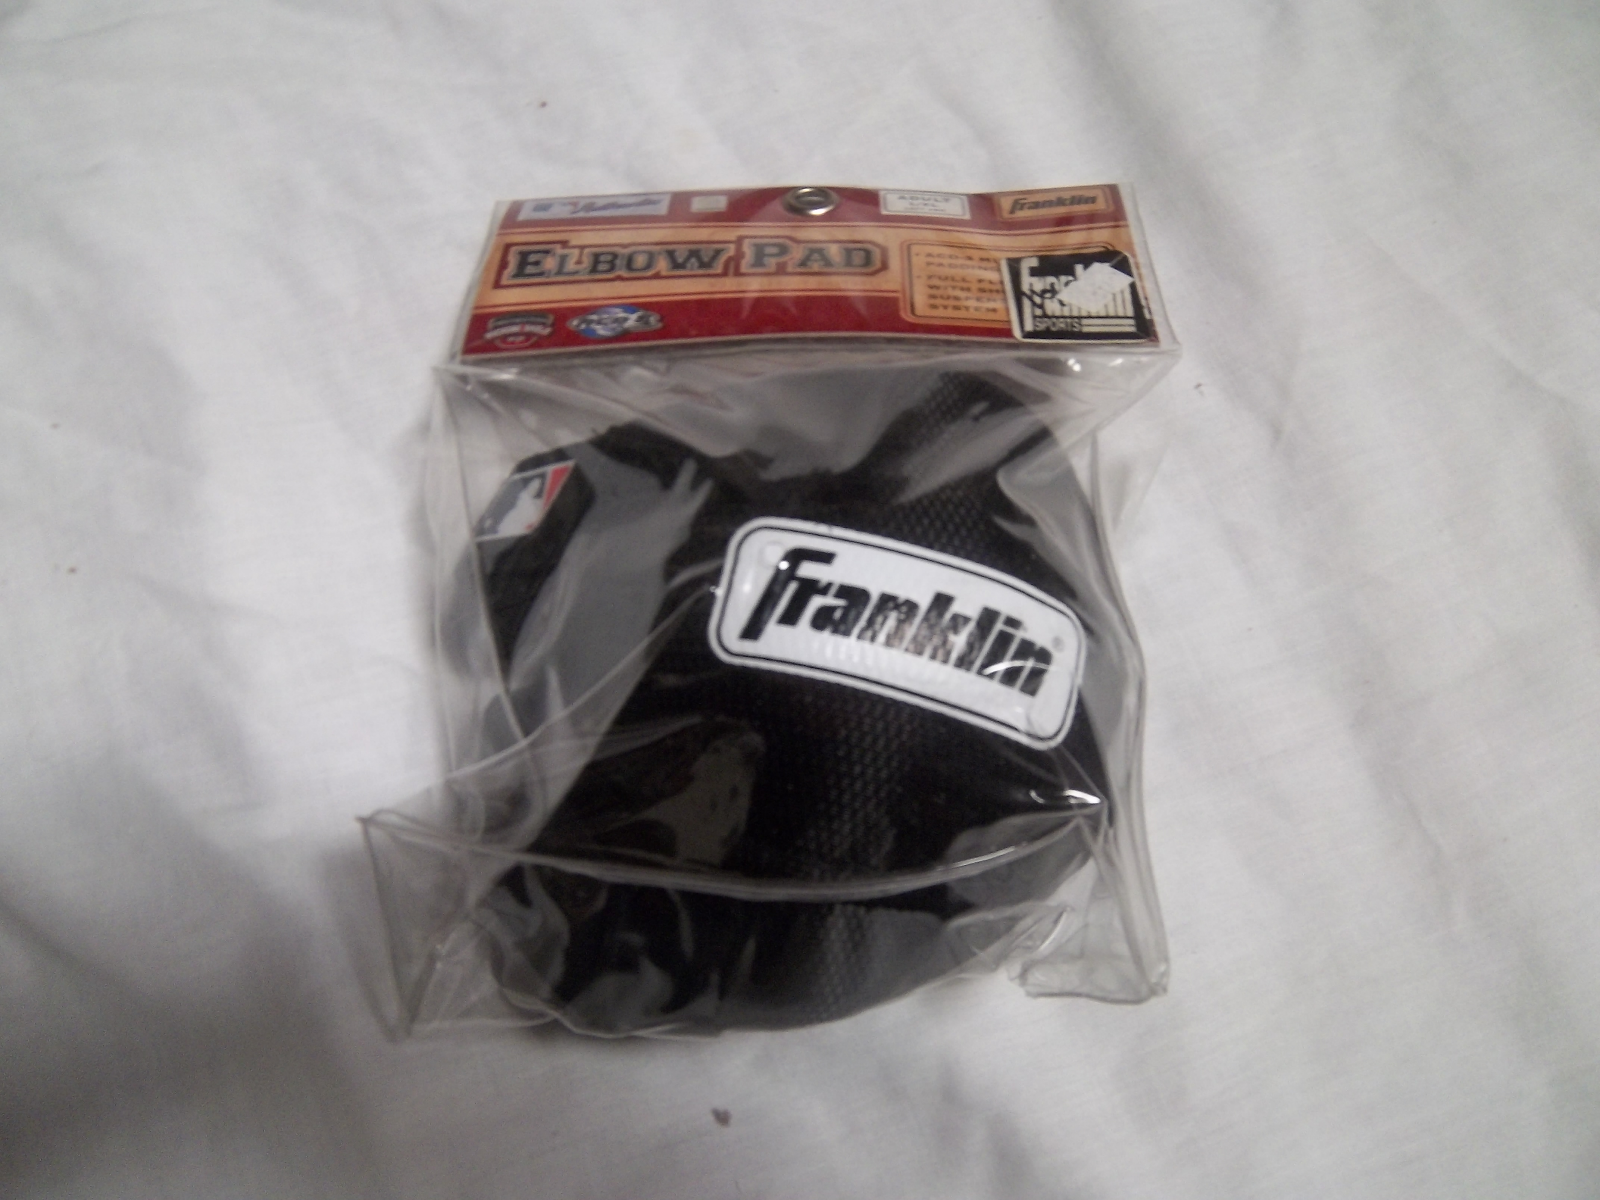 FRANKLIN 2796 ELBOW PAD-VARIOUS SIZES (GOES ON LEFT ARM  ARM FOR RH BATTER)